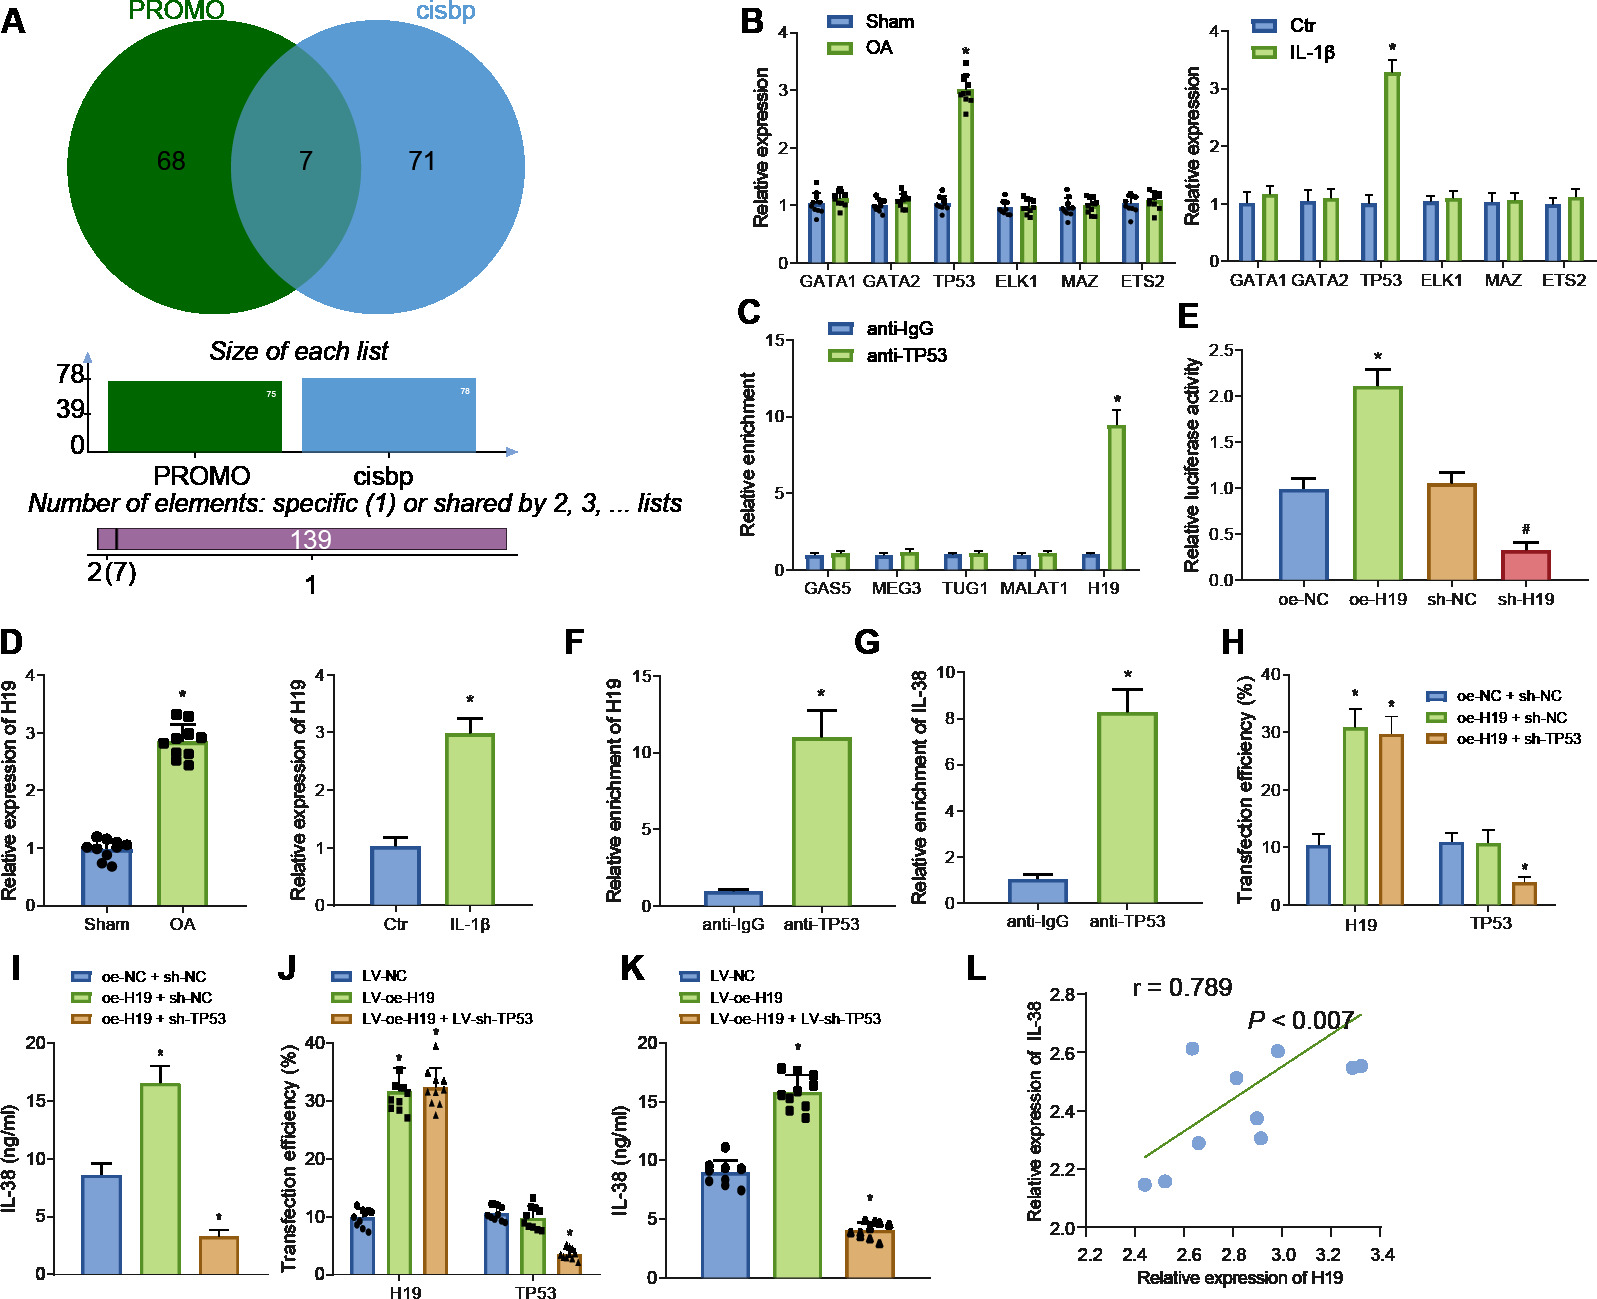 Fig. 3 
            Long noncoding RNA (lncRNA) H19 increases interleukin (IL)-38 expression through transcription factor TP53. a) Prediction of potential transcription factors regulating IL-38 by PROMO and CIS-BP databases. b) Messenger RNA (mRNA) expression of ETS1, TP53, GATA2, GATA1, ELK1, MAZ, and ETS2 in osteoarthritis (OA) mice and chondrocytes. *p < 0.05 versus sham-operated mice or control chondrocytes. c) TP53 enrichment of lncRNAs GAS5, MEG3, TUG1, MALAT1, and H19 determined by RNA binding protein immunoprecipitation (RIP) assay. Results are normalized to immunoglobulin G (IgG). *p < 0.05 versus anti-IgG. d) mRNA expression of lncRNA H19 in OA mice (n = 10) and chondrocytes. *p < 0.05 versus sham-operated mice or control chondrocytes. e) Relative luciferase activity of IL-38 promoter in OA chondrocytes after various treatments. *p < 0.05 versus OA chondrocytes treated with oe-negative control (NC), #p < 0.05 versus OA chondrocytes treated with sh-NC. f) Relative enrichment of lncRNA H19 by TP53 determined by RIP assay. *p < 0.05 versus anti-IgG. g) Relative enrichment of IL-38 by TP53 in OA chondrocytes determined by chromatin immunoprecipitation (ChIP) assay. *p < 0.05 versus anti-IgG. h) Transfection efficiency in OA chondrocytes detected by quantitative reverse transcription polymerase chain reaction (RT-qPCR). *p < 0.05 versus OA chondrocytes treated with both oe-NC and sh-NC. i) IL-38 level in OA chondrocytes after various treatments. *p < 0.05 versus OA chondrocytes co-treated with oe-NC and sh-NC. j) Transfection efficiency in OA mice detected by RT-qPCR. *p < 0.05 versus OA mice treated with lentivirus vector (LV)-NC. k) IL-38 levels in OA mice after various treatments. *p < 0.05 versus OA mice treated with LV-NC. l) Pearson analysis for the expression of lncRNA H19 and IL-38 in knee joint cartilage tissues from OA mice. The measurement data were expressed as mean (standard deviation). Comparison between two groups was conducted by independent-samples t-test. Comparison among multiple groups was conducted by one-way analysis of variance, followed by Tukey’s post hoc test; n = 10. The cell experiment was repeated three times independently. Ctr, control.
          